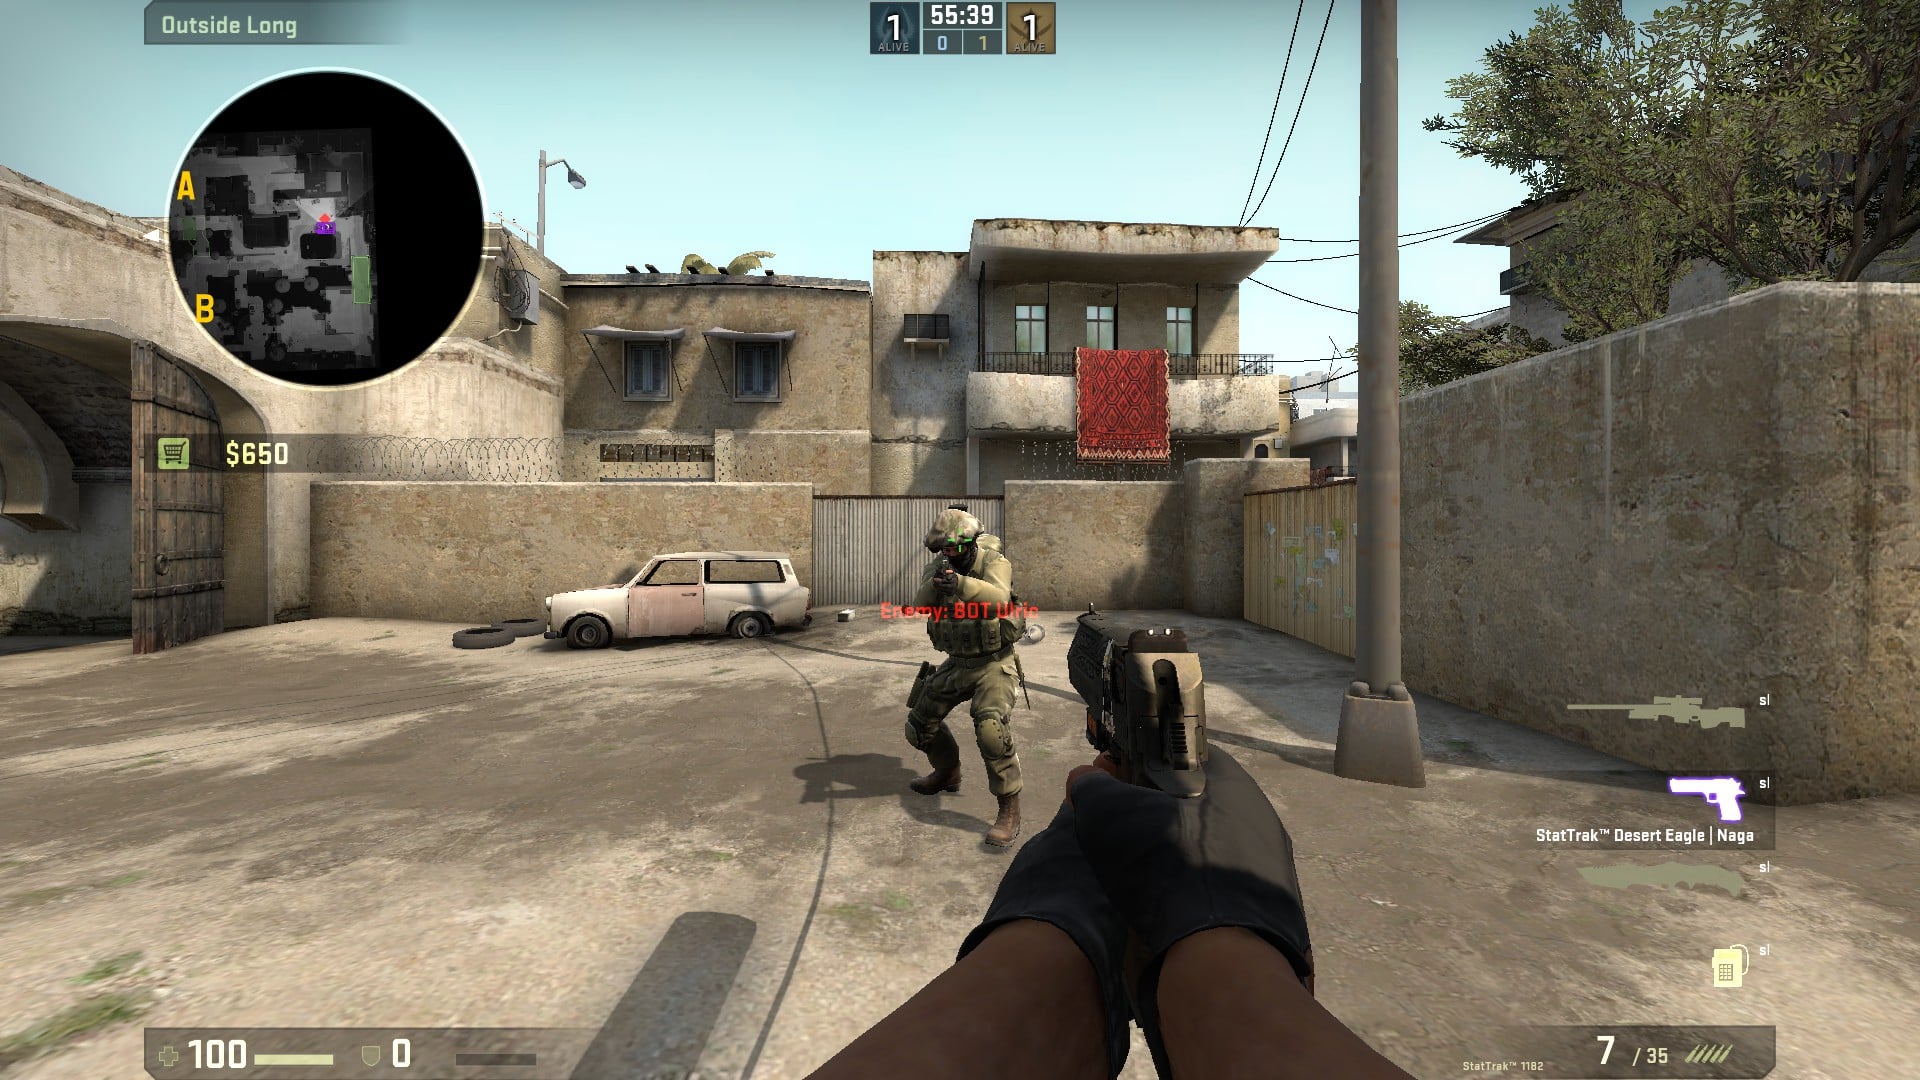 How to stretch resolution in CS:GO